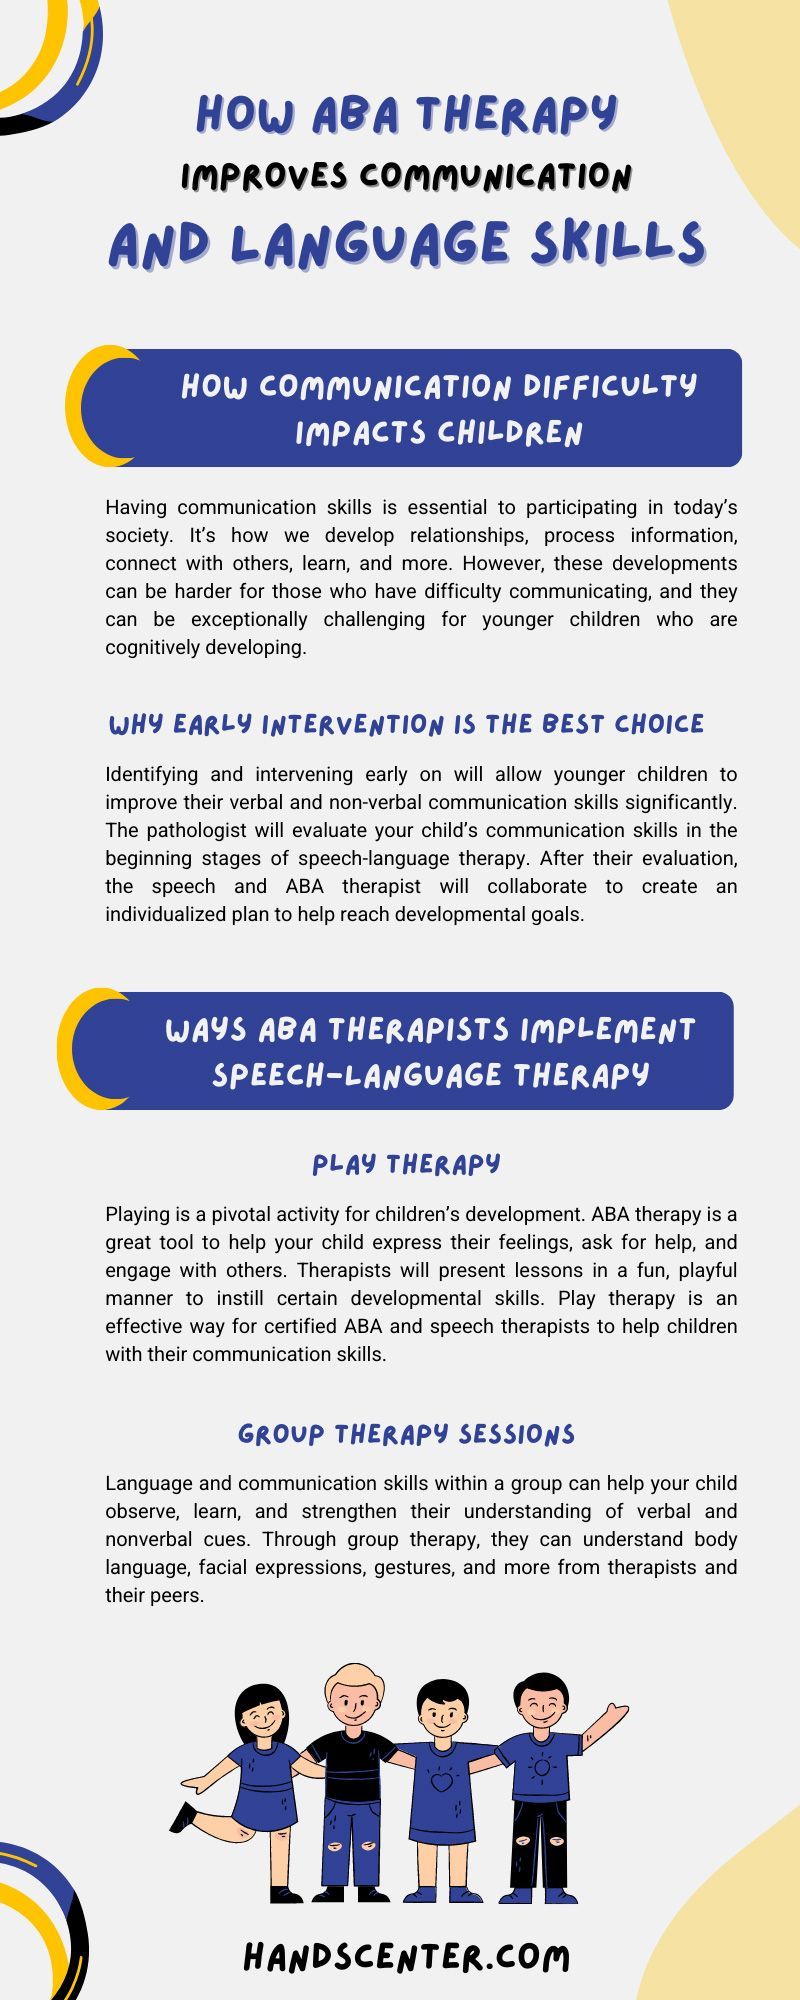 How ABA Therapy Improves Communication and Language Skills